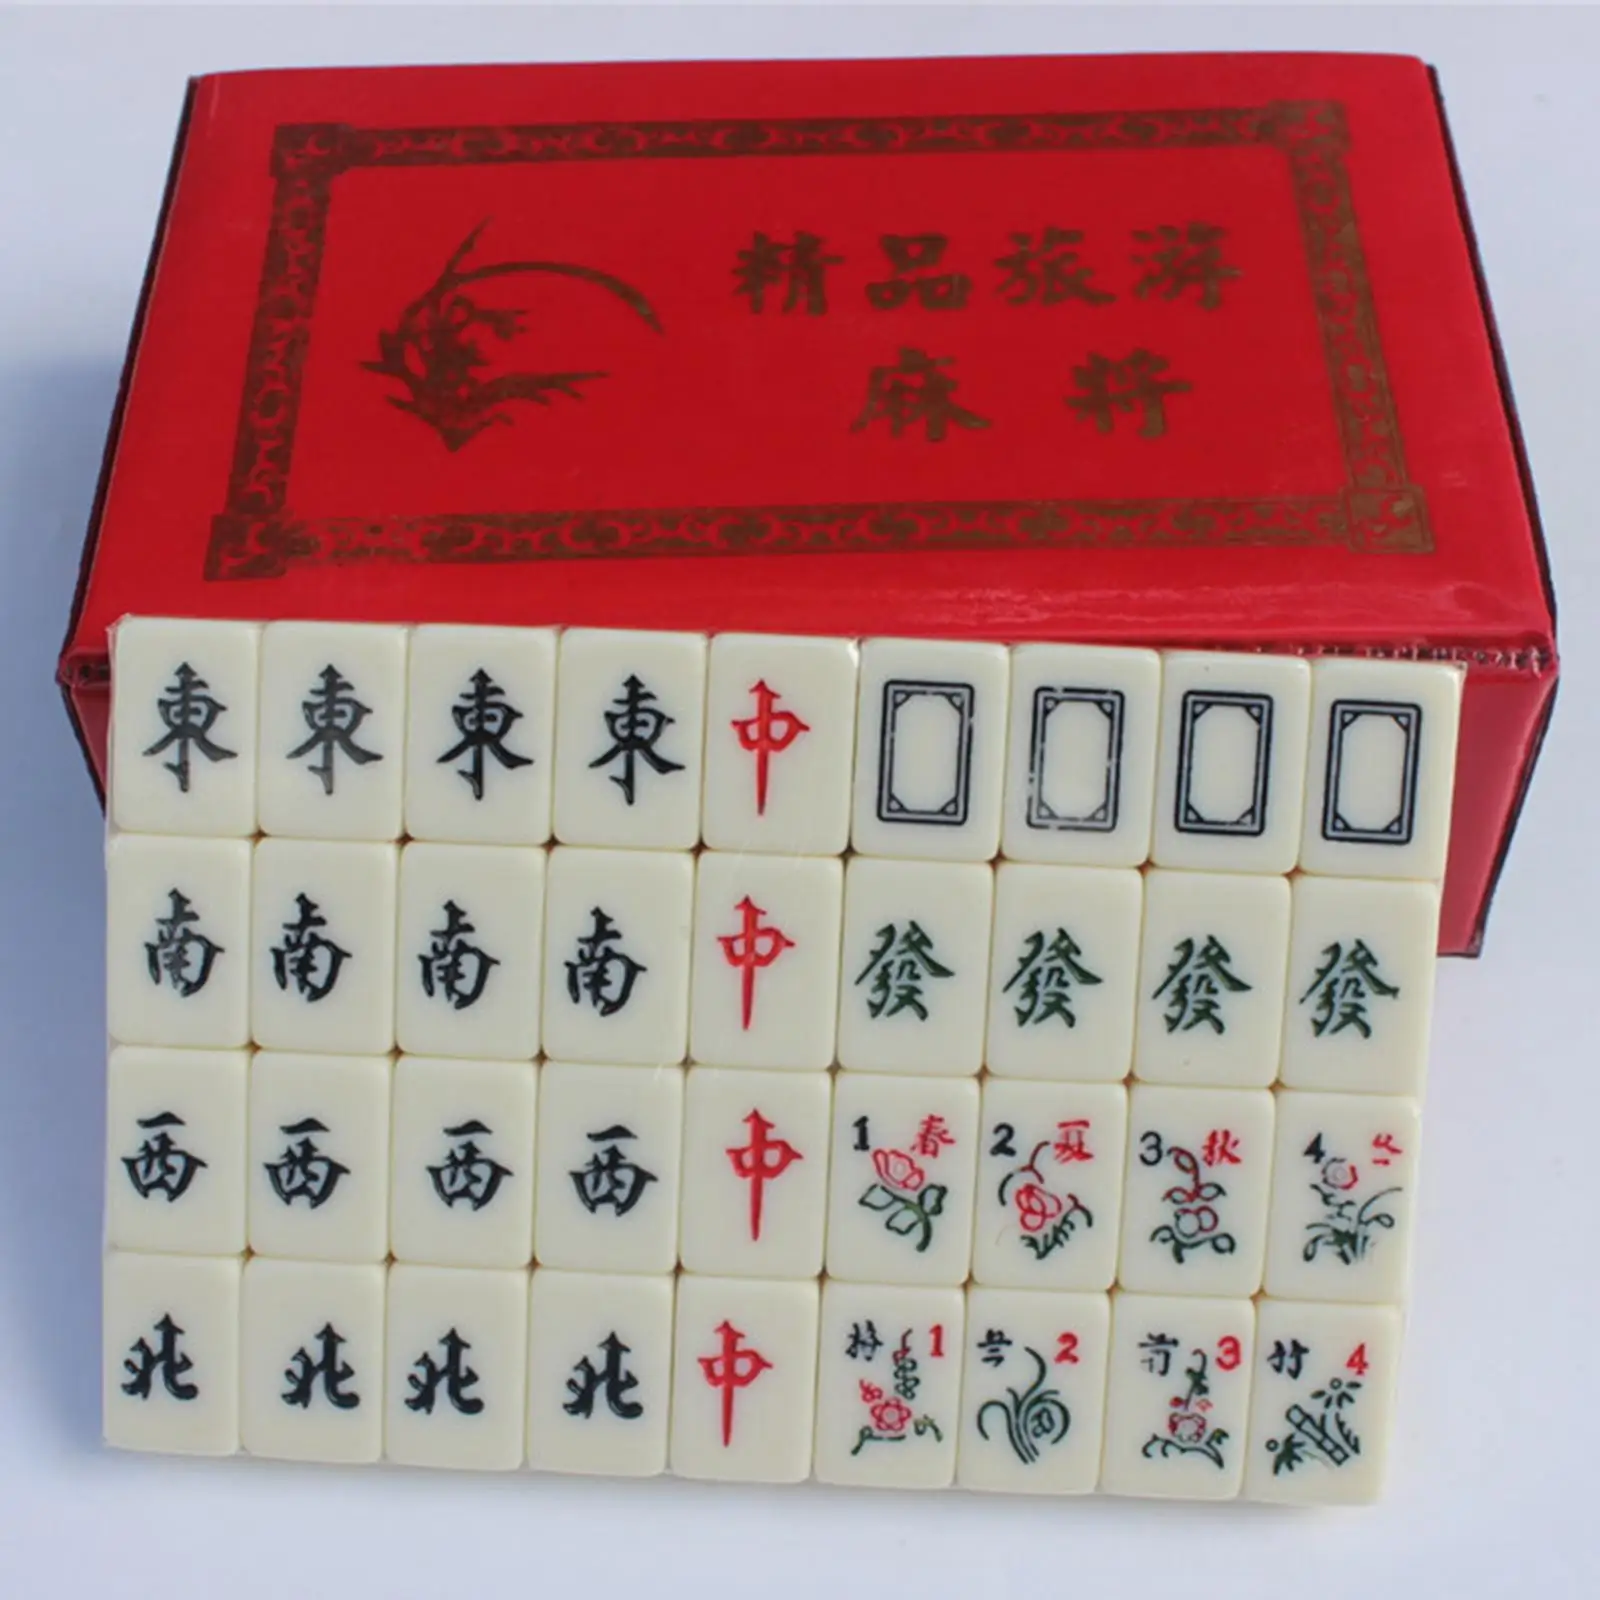 Mini Chinese Mahjong Game Set Board Game with Carrying Case mahjong Tiles Game and 2 Blank Tiles Lightweight for Travel Home